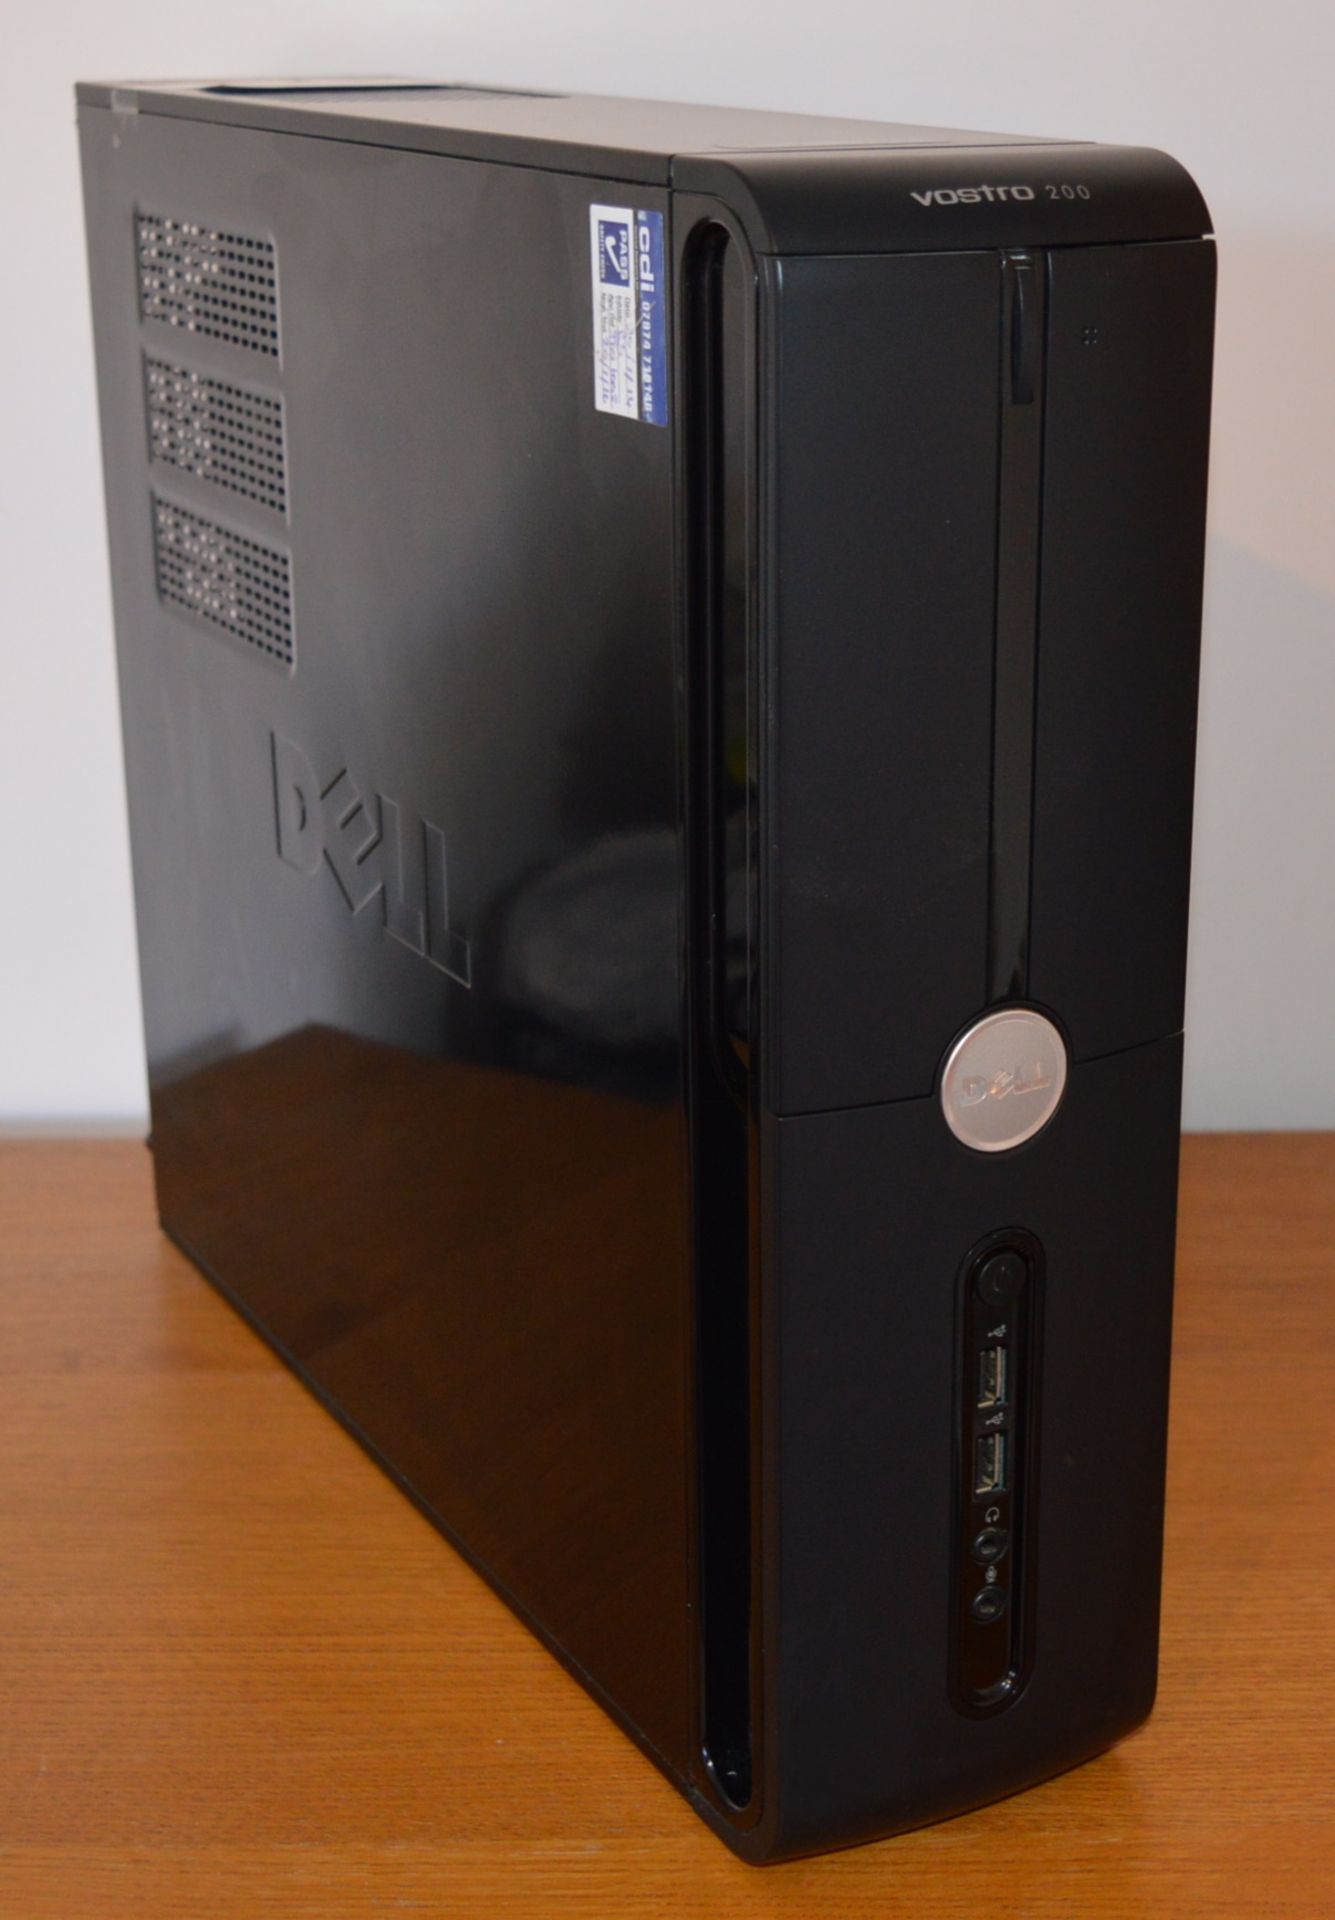 1 x Dell Vostro 220 Desktop Computer - Features Intel 2.0ghz Dual Core Processor, 2gb Ram and DVD - Image 2 of 4